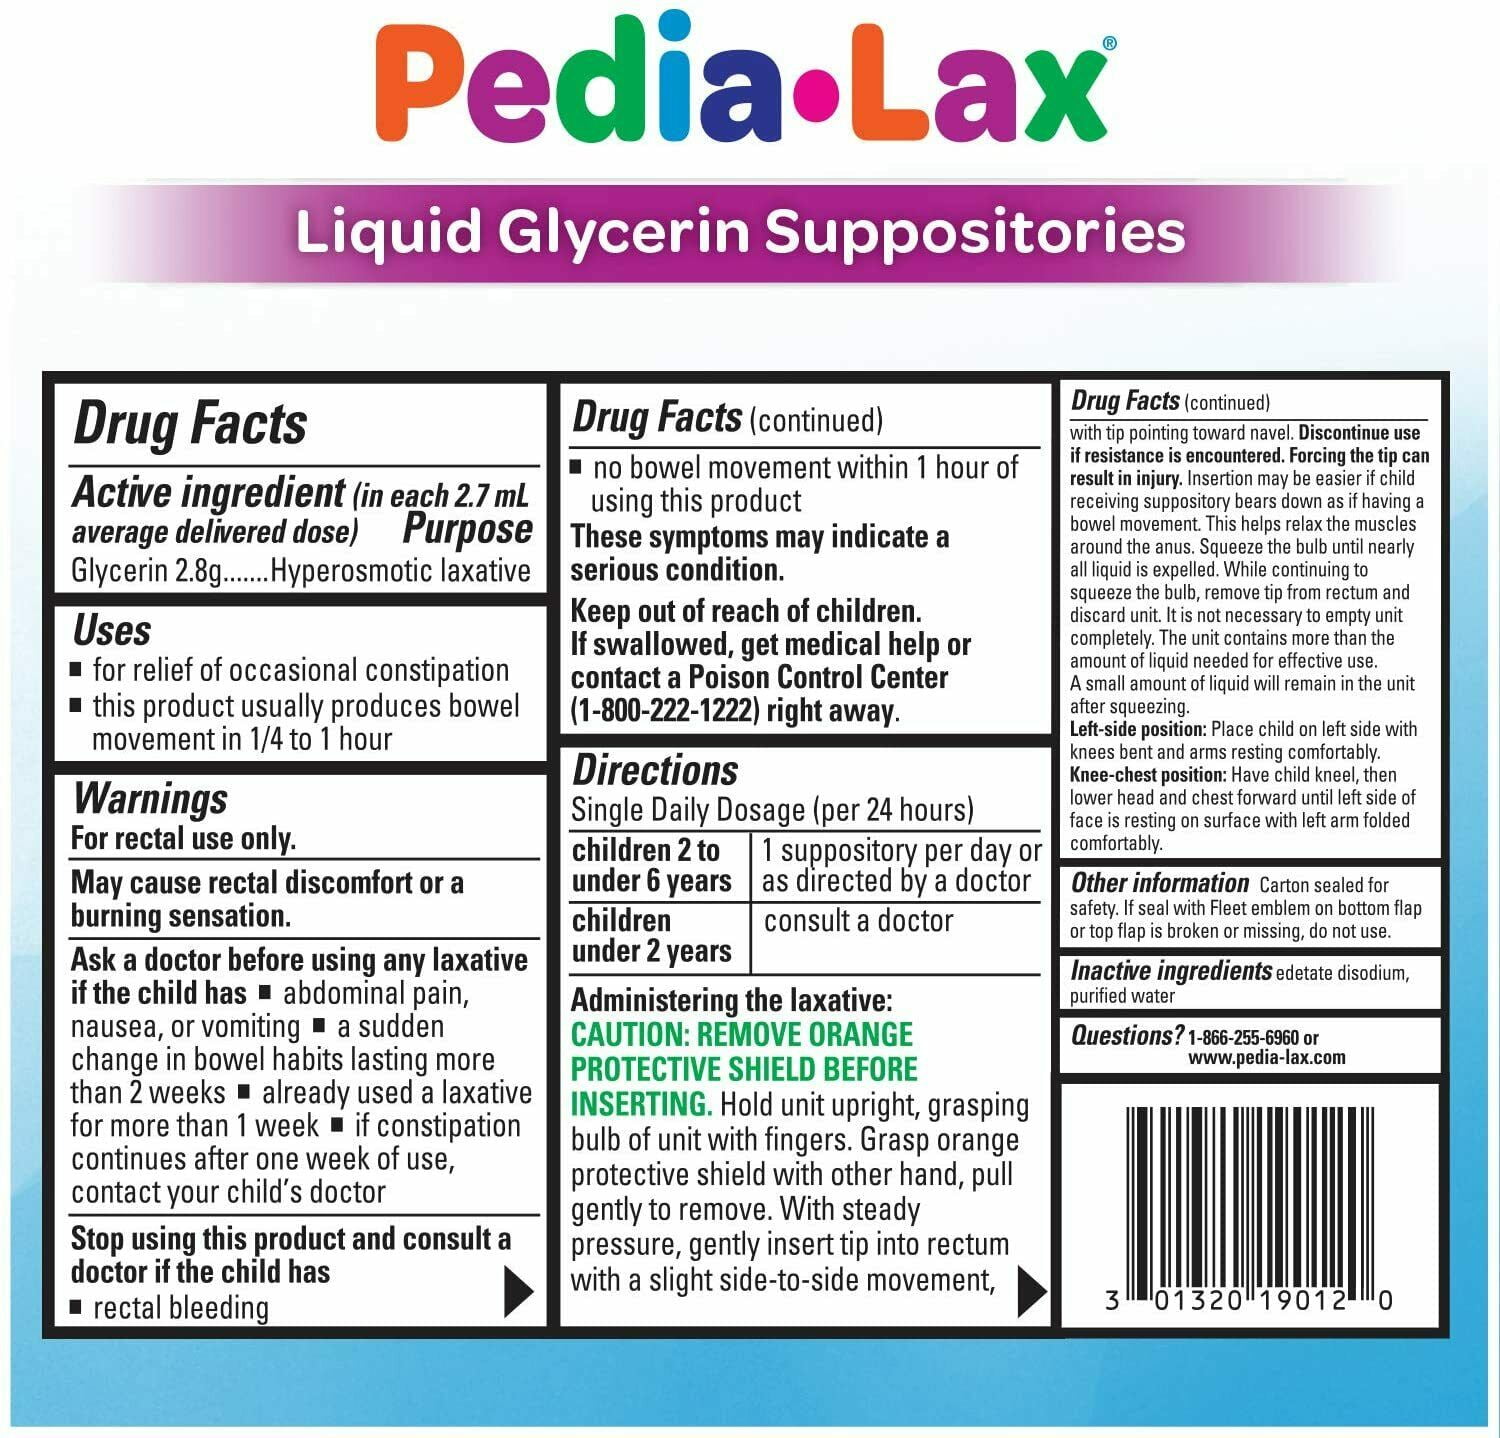 Save on Fleet Pedia-Lax Liquid Glycerin Suppositories Order Online Delivery